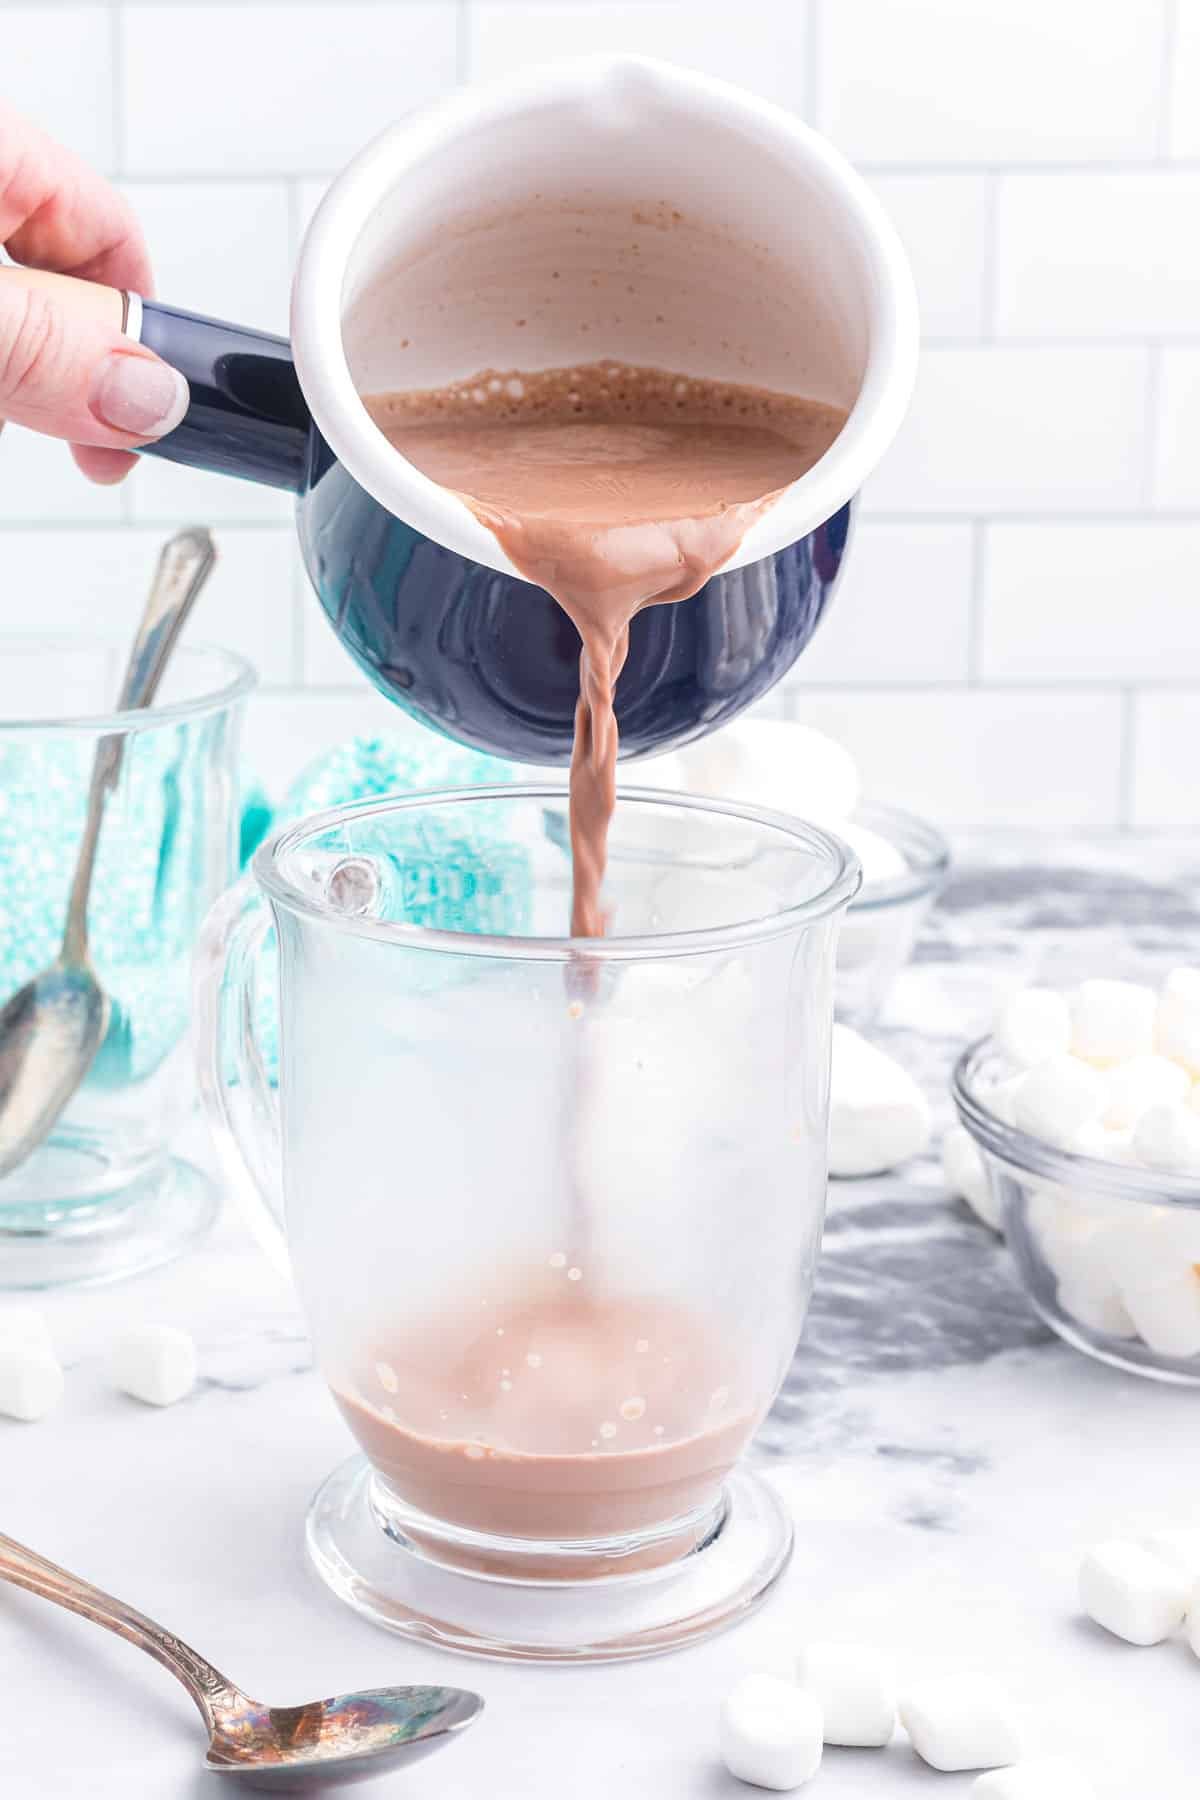 hot chocolate being poured into a mug.